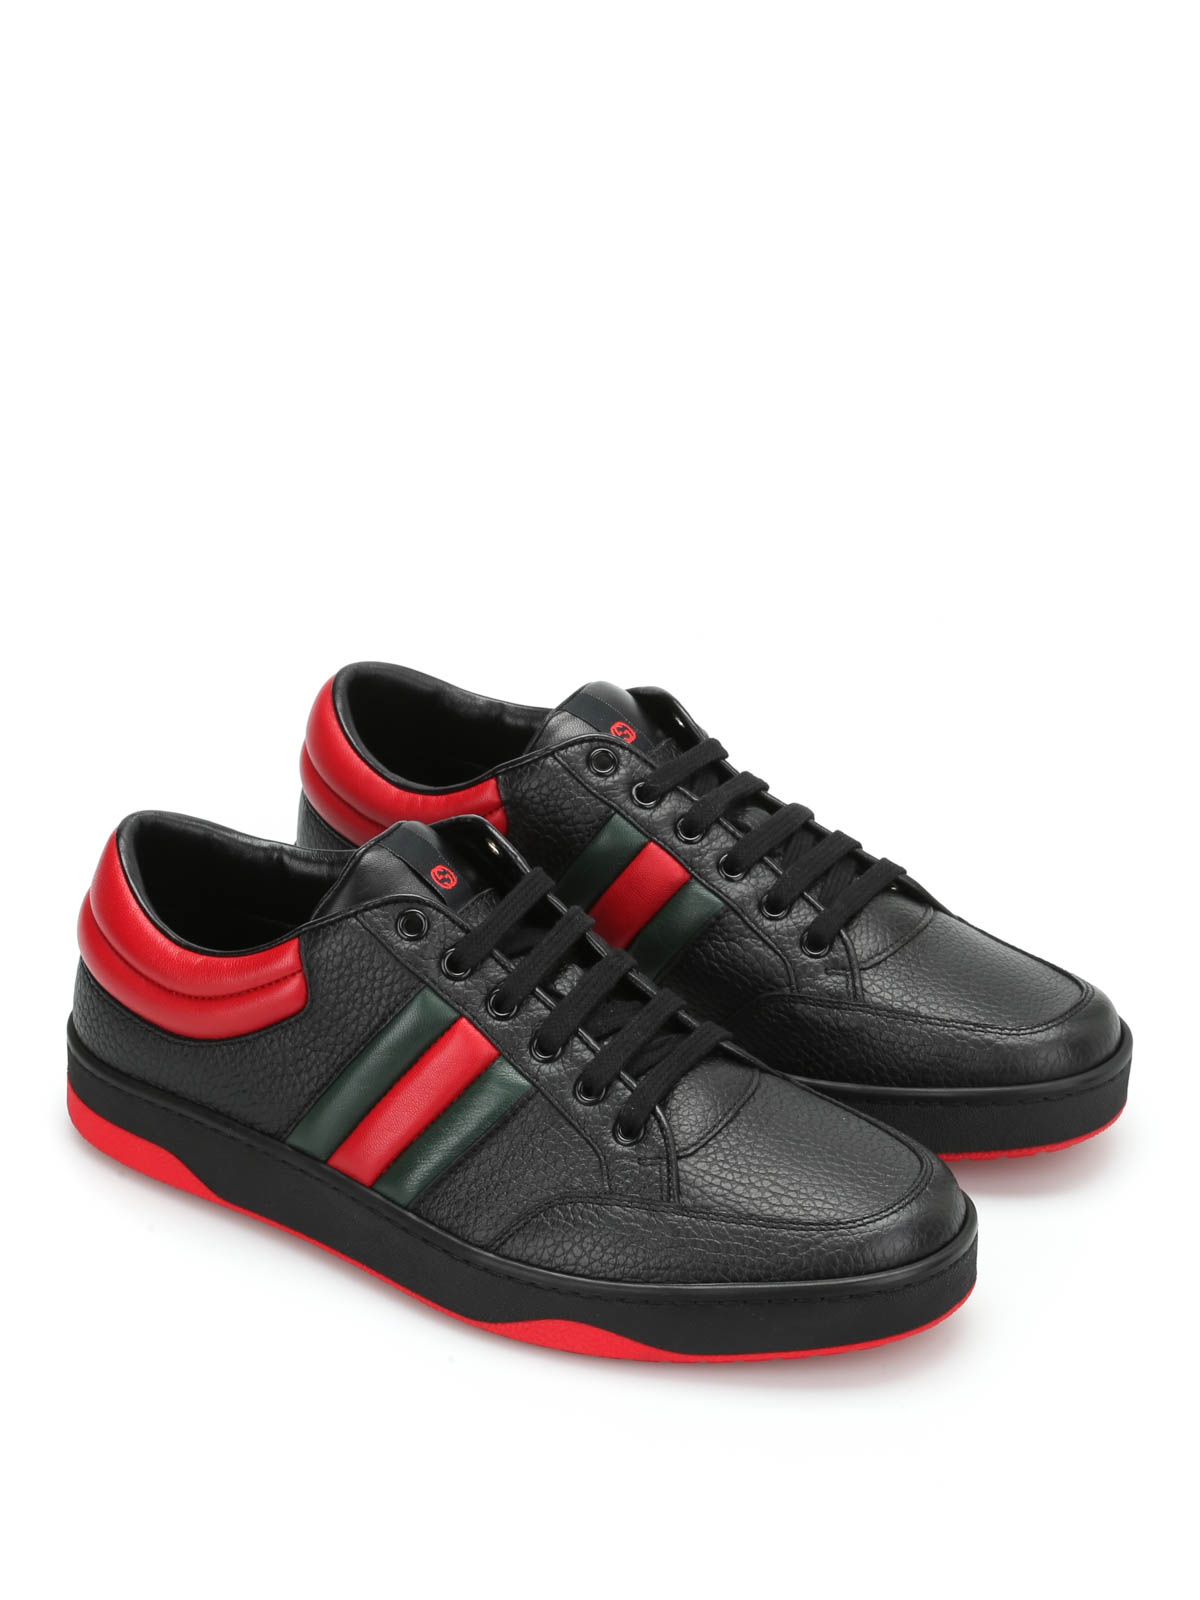 Gucci - Leather sneakers - trainers - 407330DEF301074